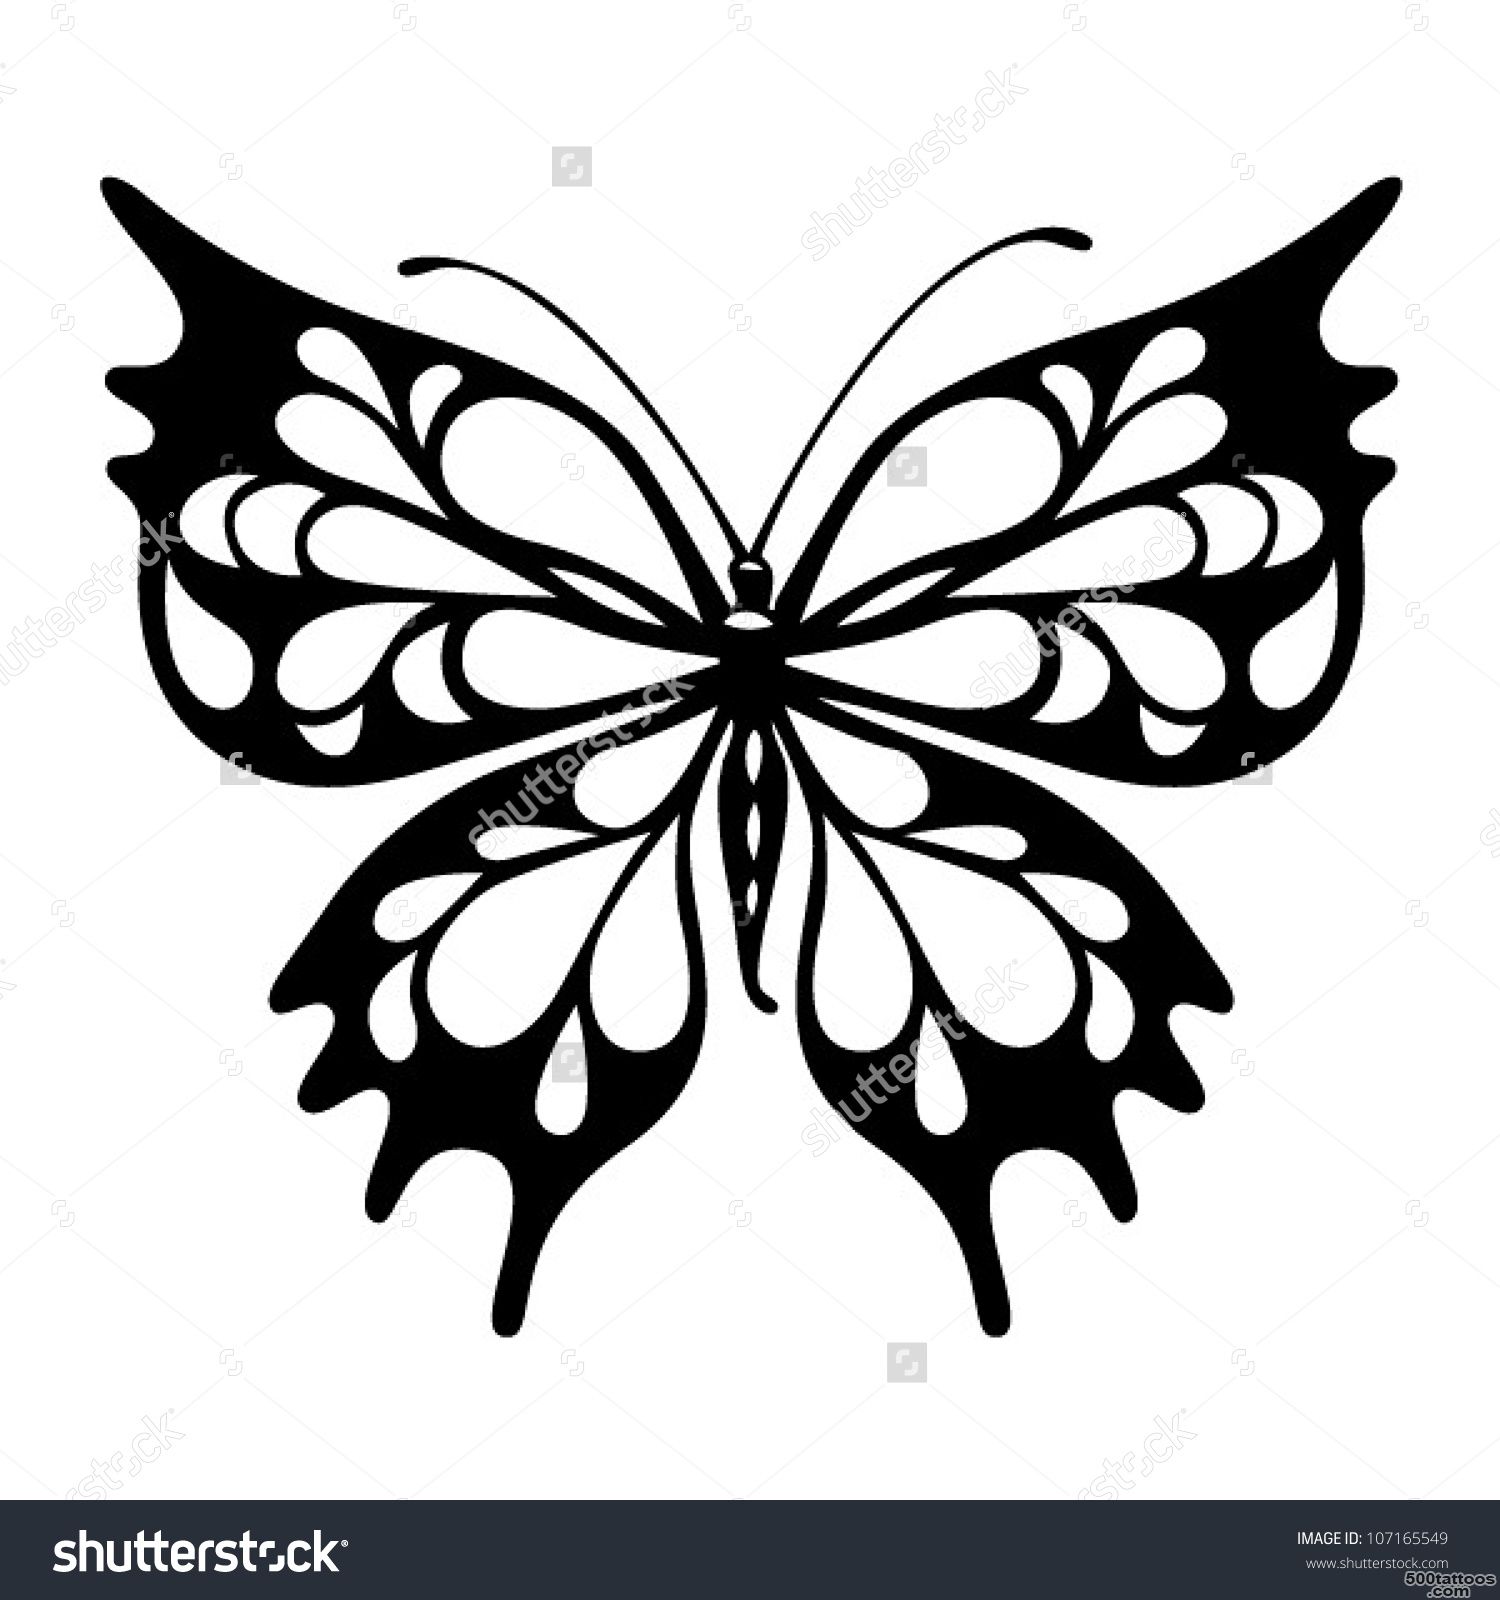 Butterfly Tattoo Stock Photos, Images, amp Pictures  Shutterstock_42